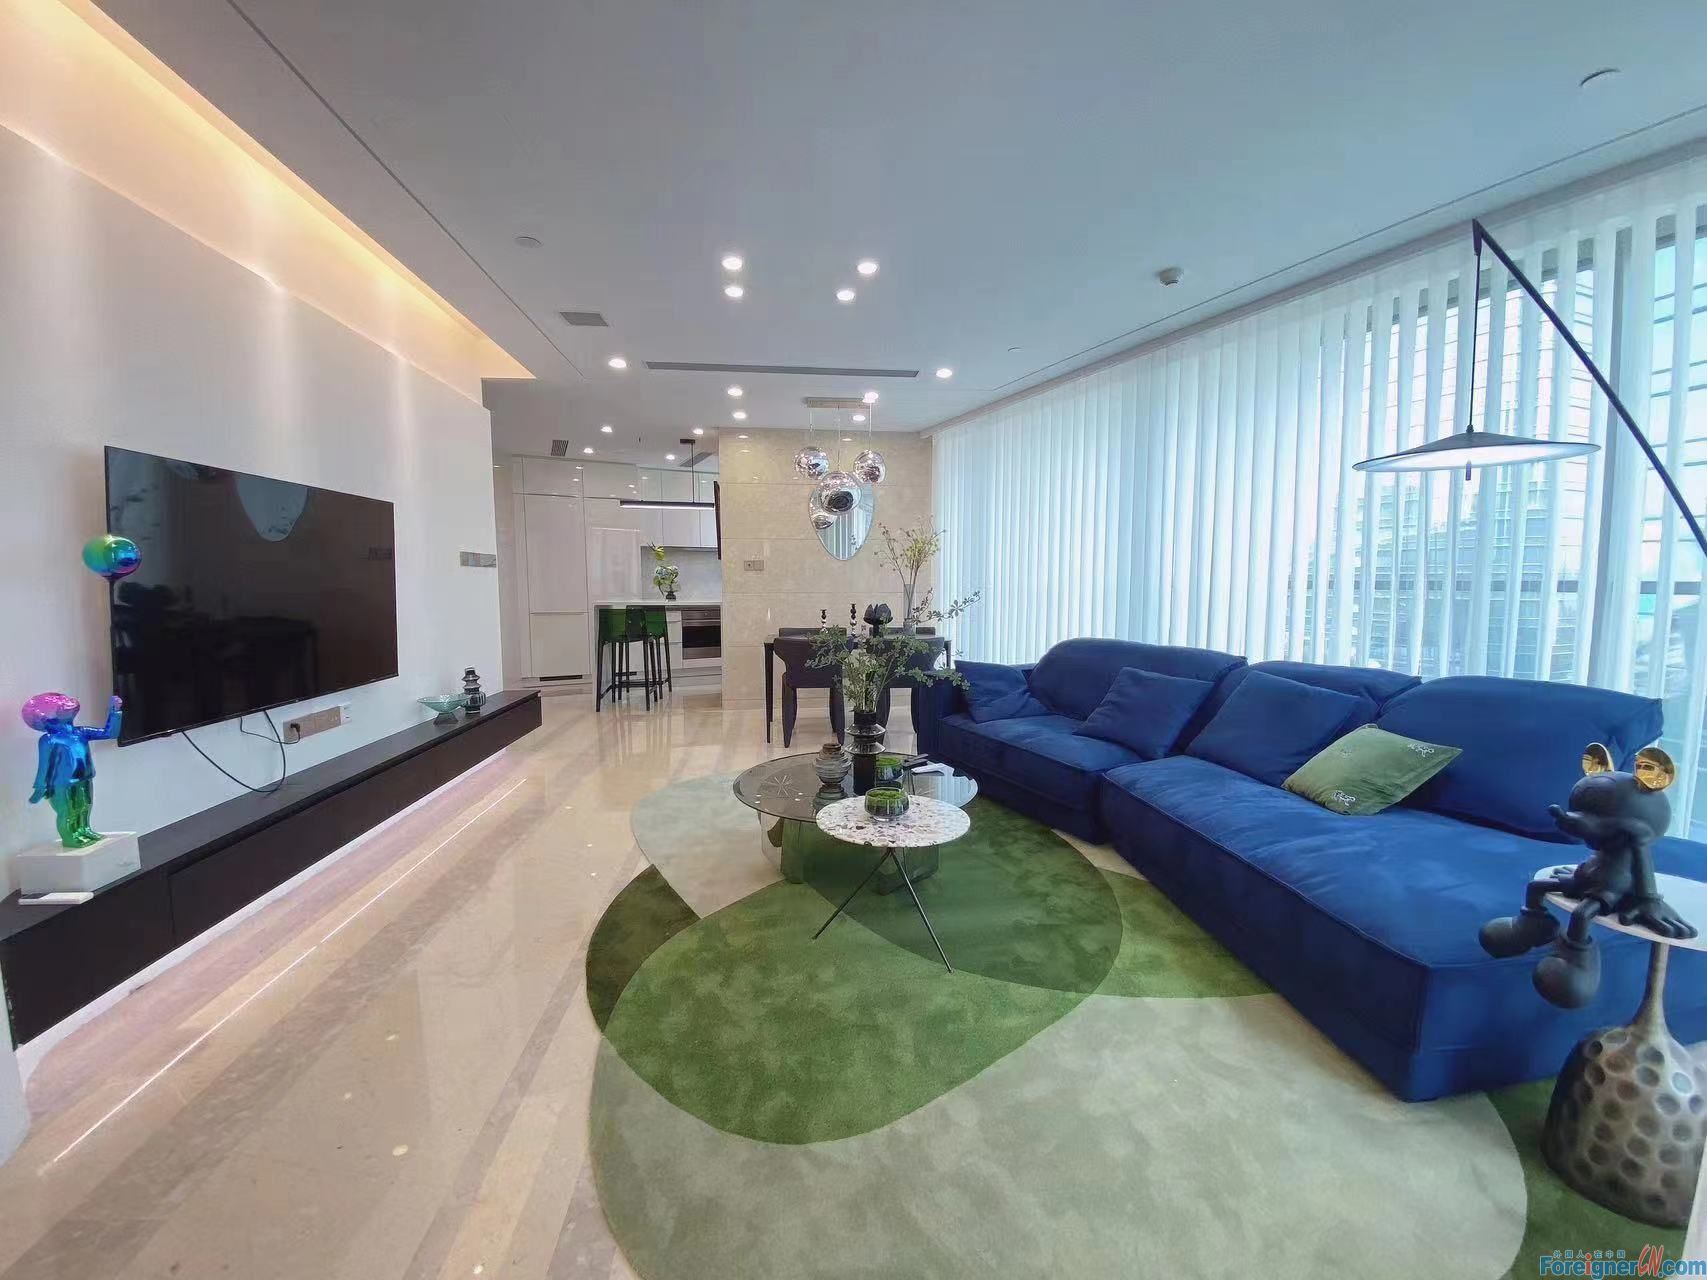 Luxurious ! High-end Suzhou center No.9 Apartment for Expats to rent in SIP /Modern/2 bedrooms and2 baths/fully furnished with central AC & floor heating/ city-view and Jinji Lake view/Suzhou,XingHai Square